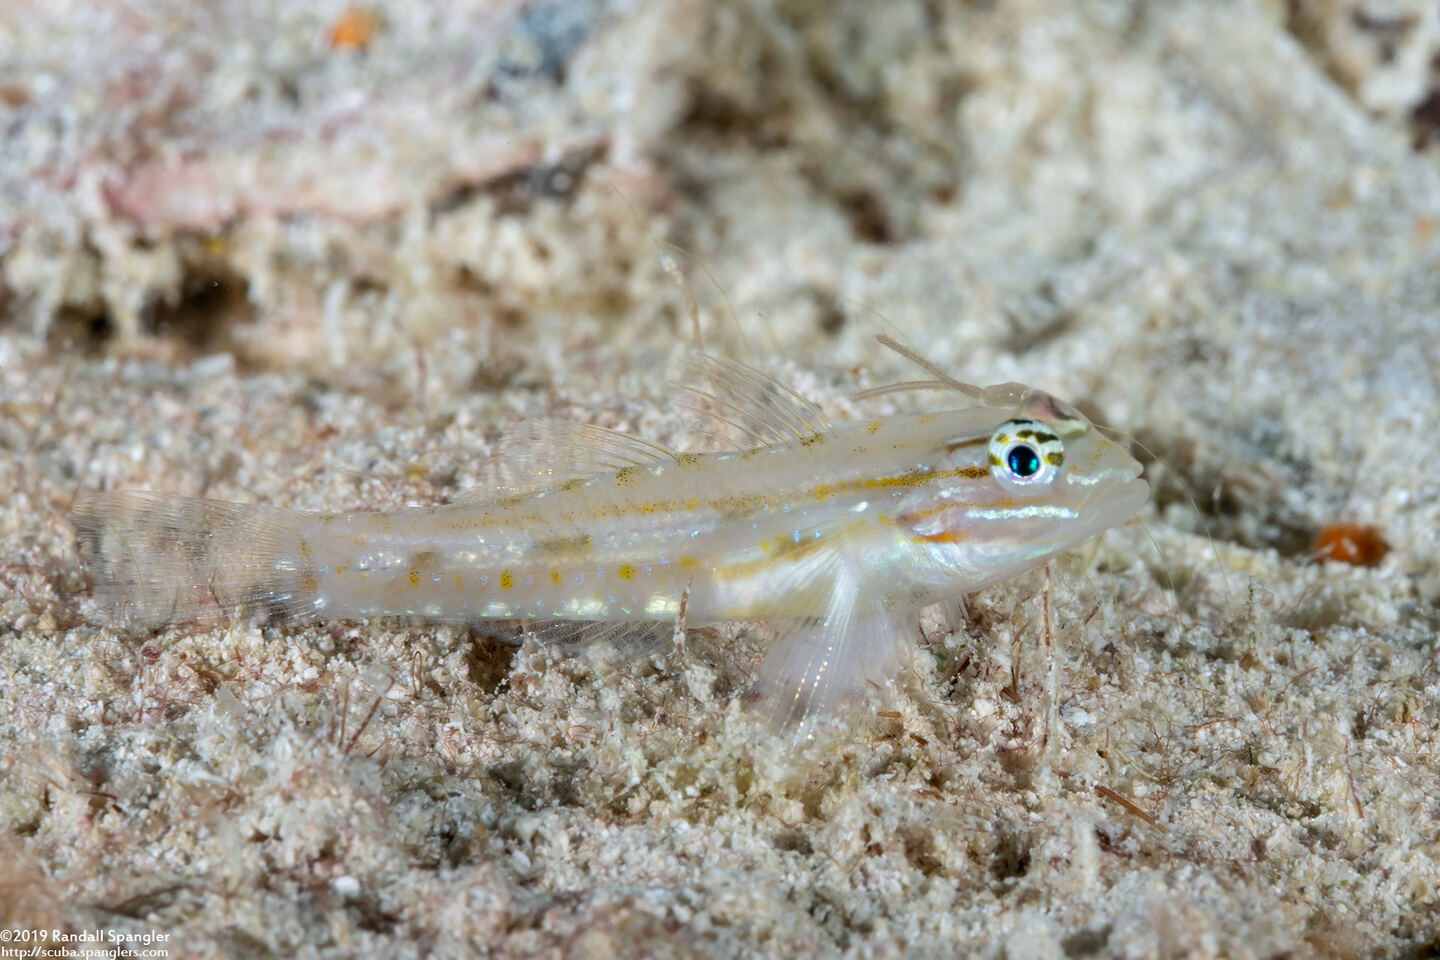 Coryphopterus venezuelae (Sand-Canyon Goby); With a parasite on its head